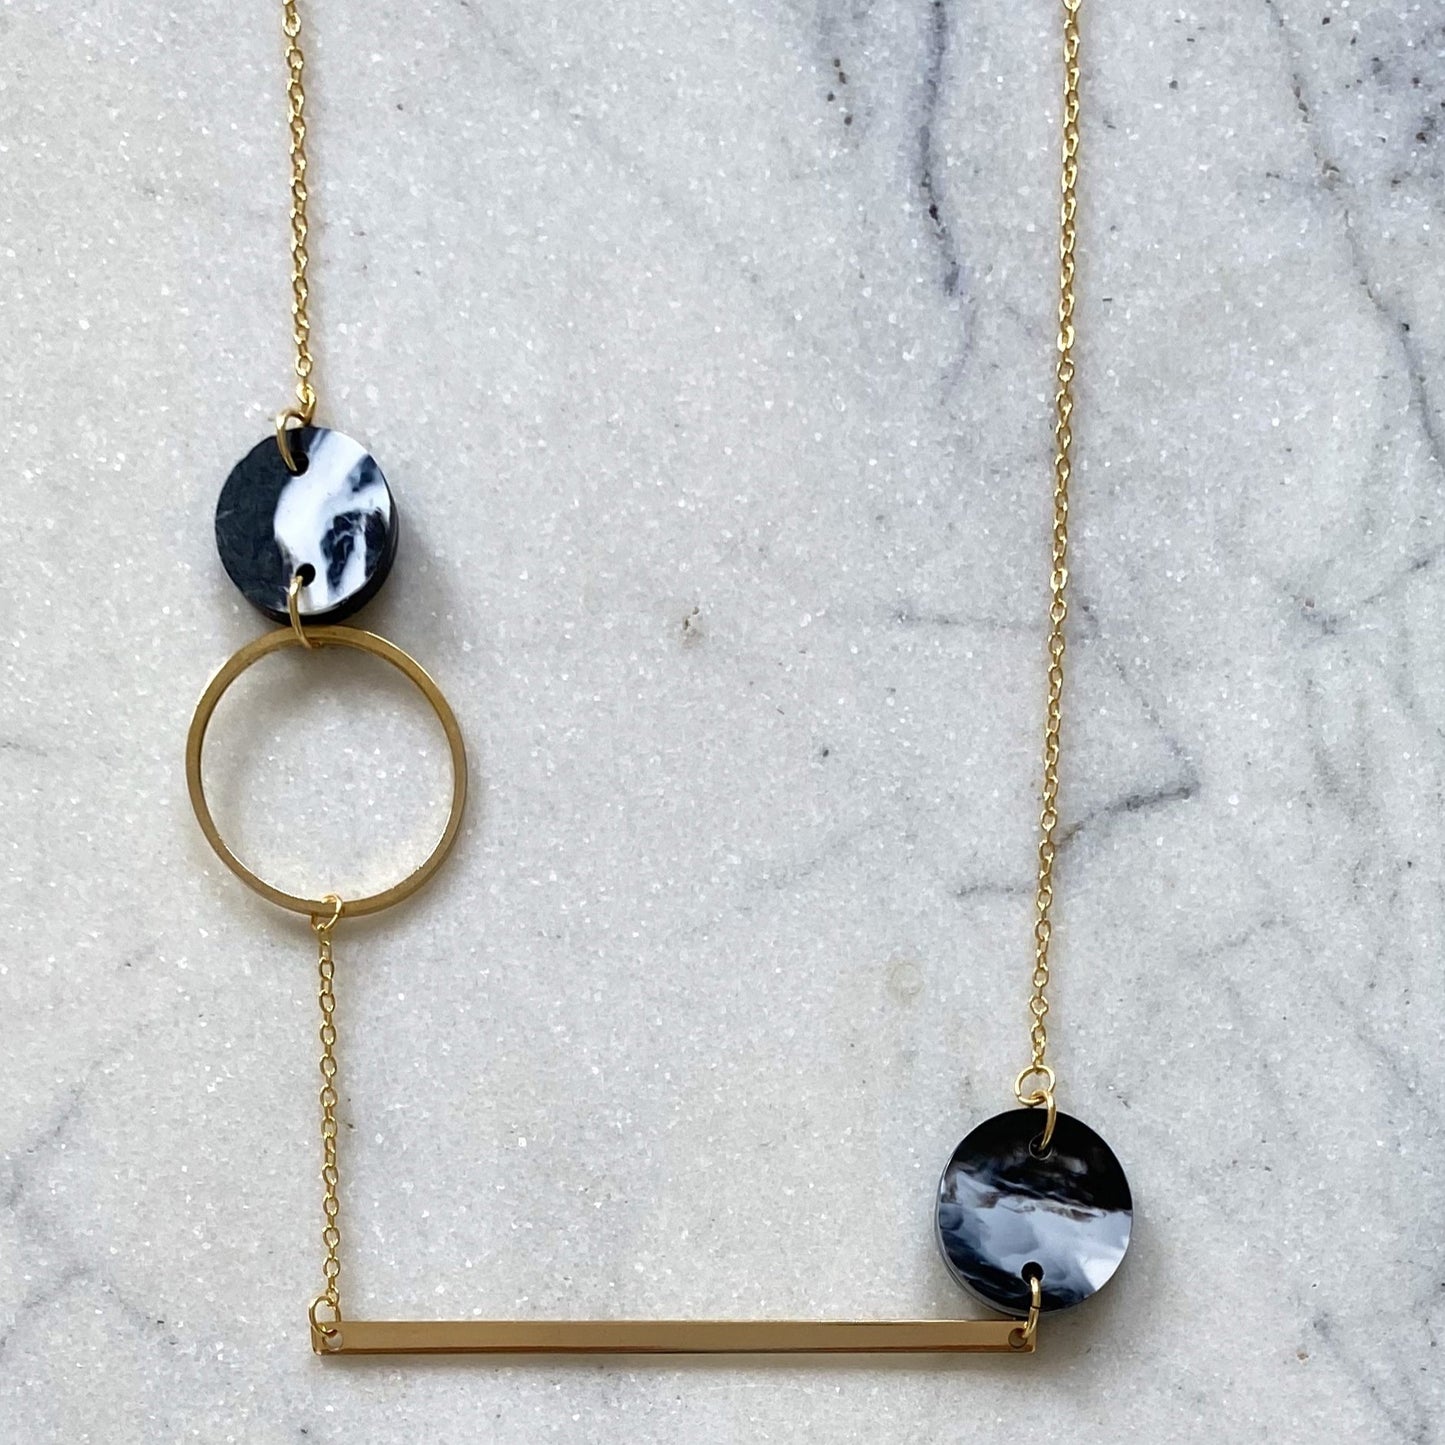 Heavenly Bodies Necklace- Black & White Marble